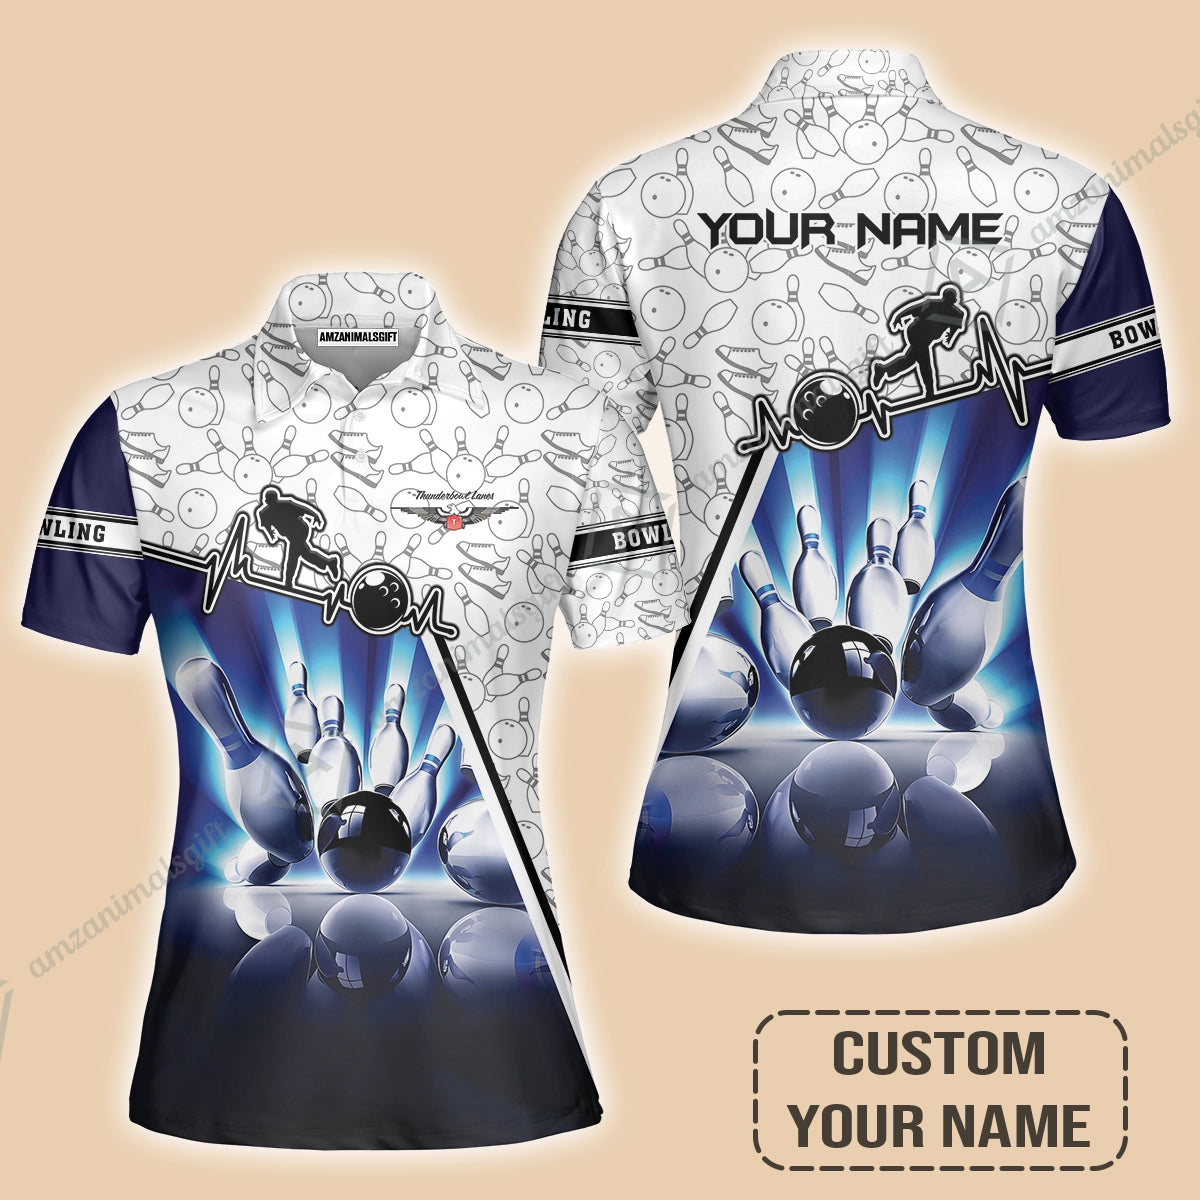 Customized Name Bowling Women Polo Shirt, Thunderbowl Lanes Unique Bowling Shirt For Women, Perfect Gift For Bowling Lovers, Bowlers